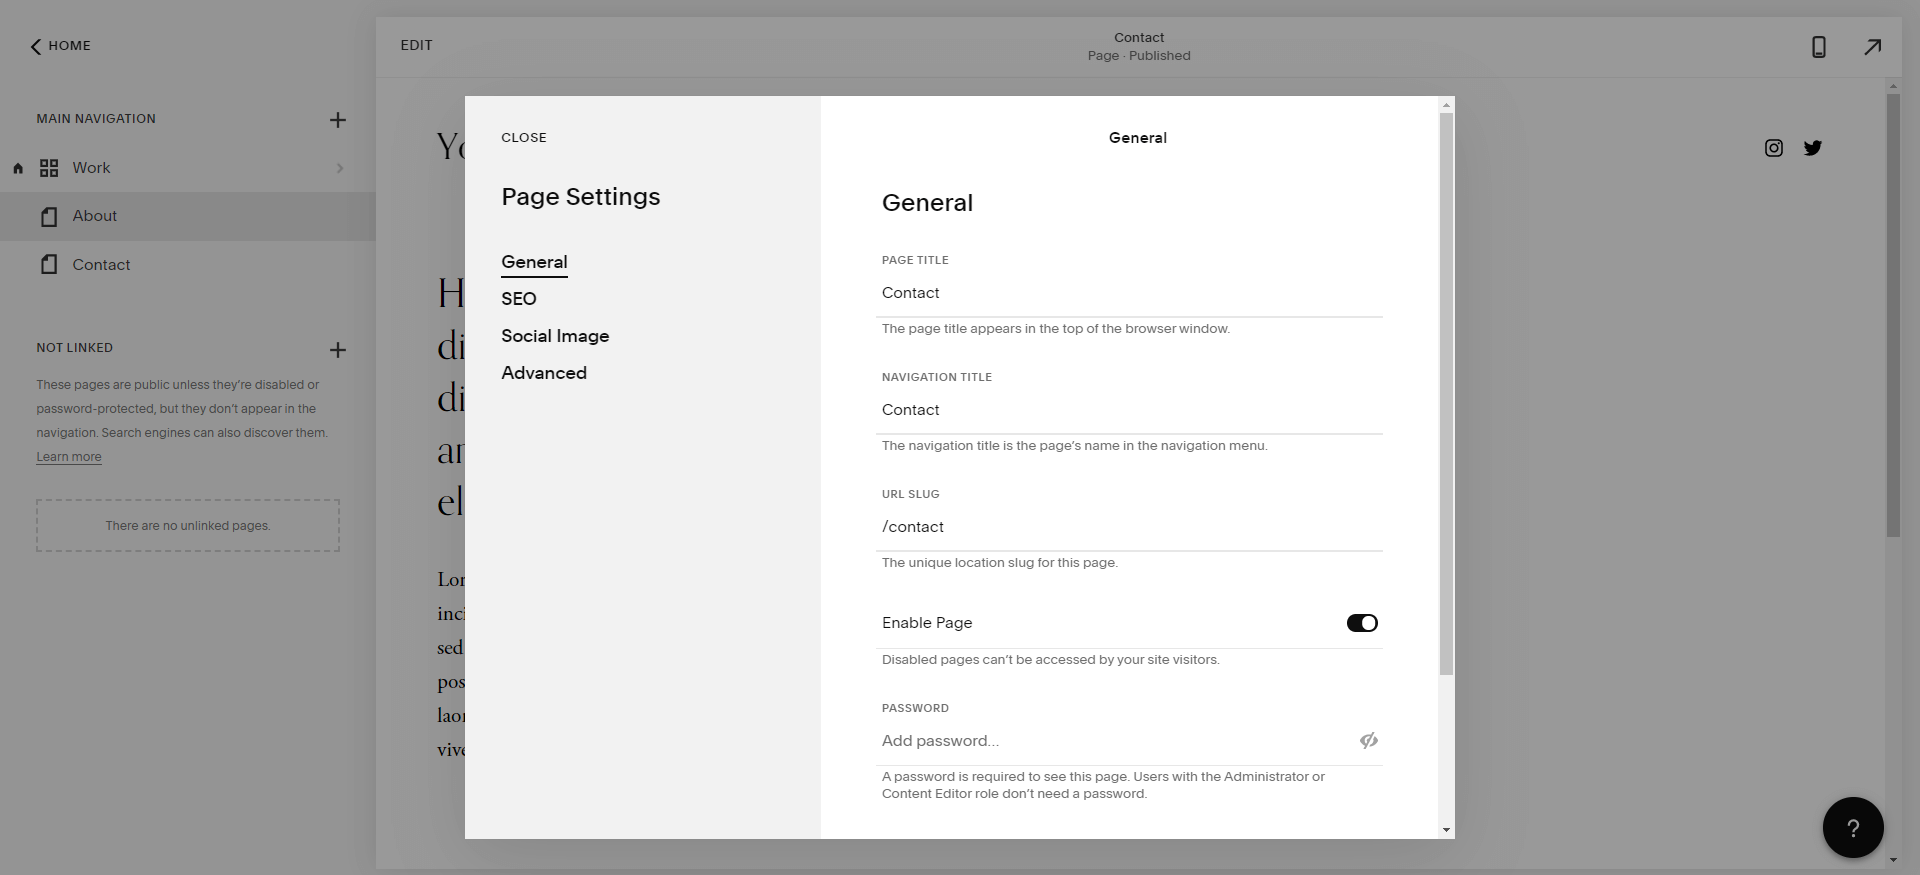 A sample of the settings in the Squarespace editor.